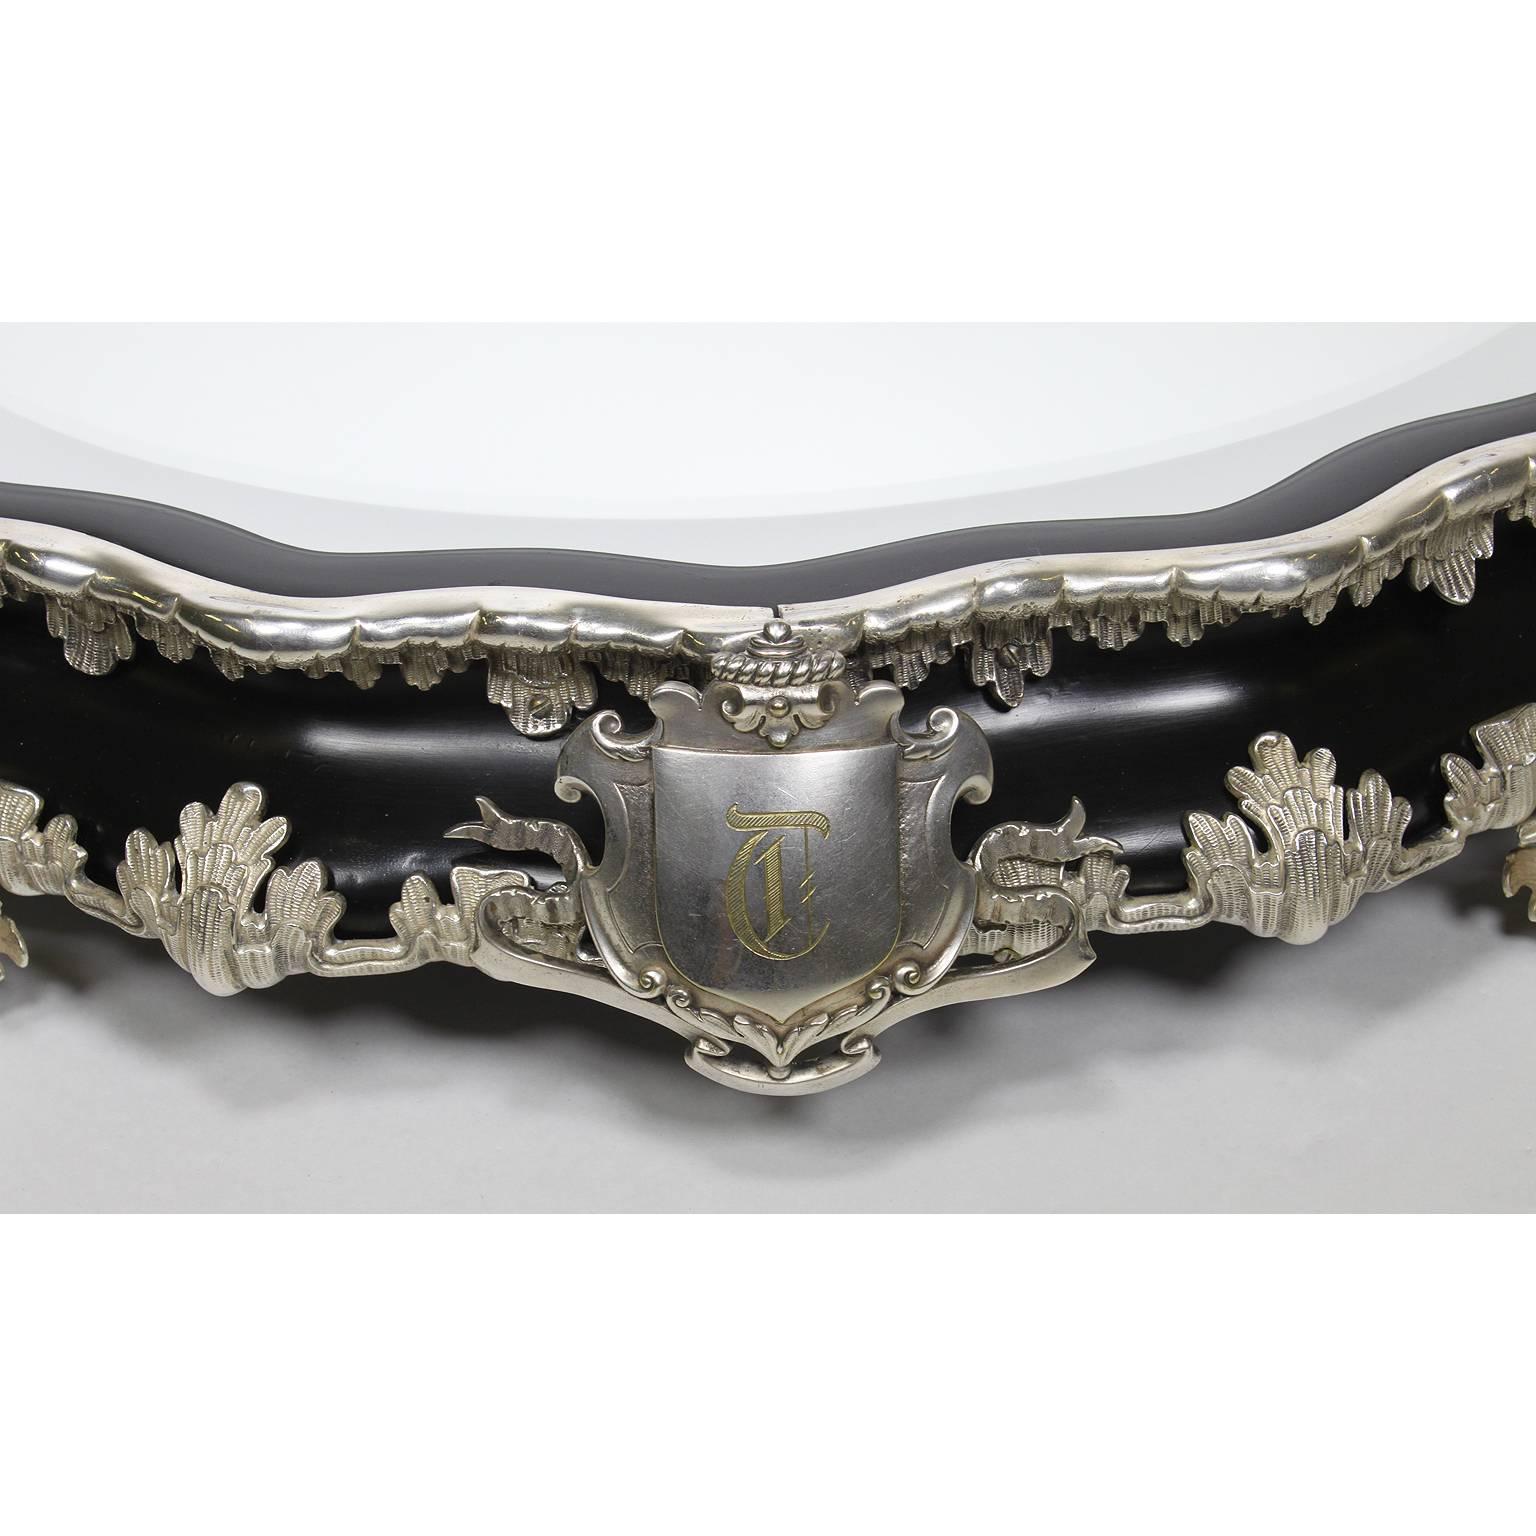 Neoclassical Revival A French 19th-20th Century Ebonized Wood & Plated Surtout de Table Centerpiece For Sale